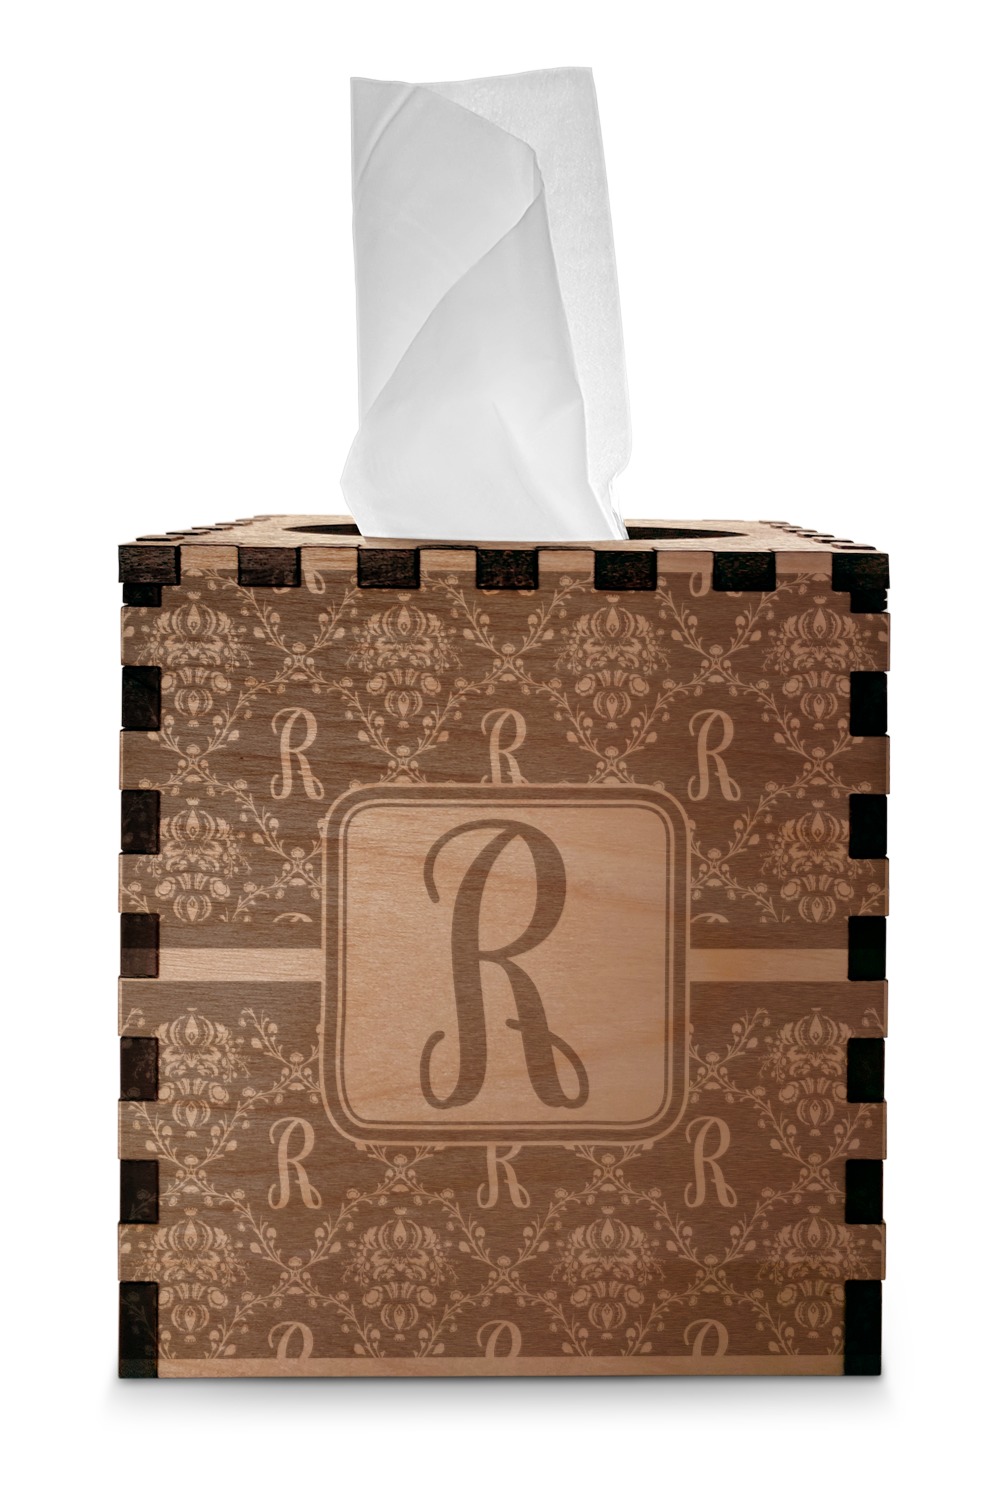 Initial Damask Wooden Tissue Box Cover - Square 